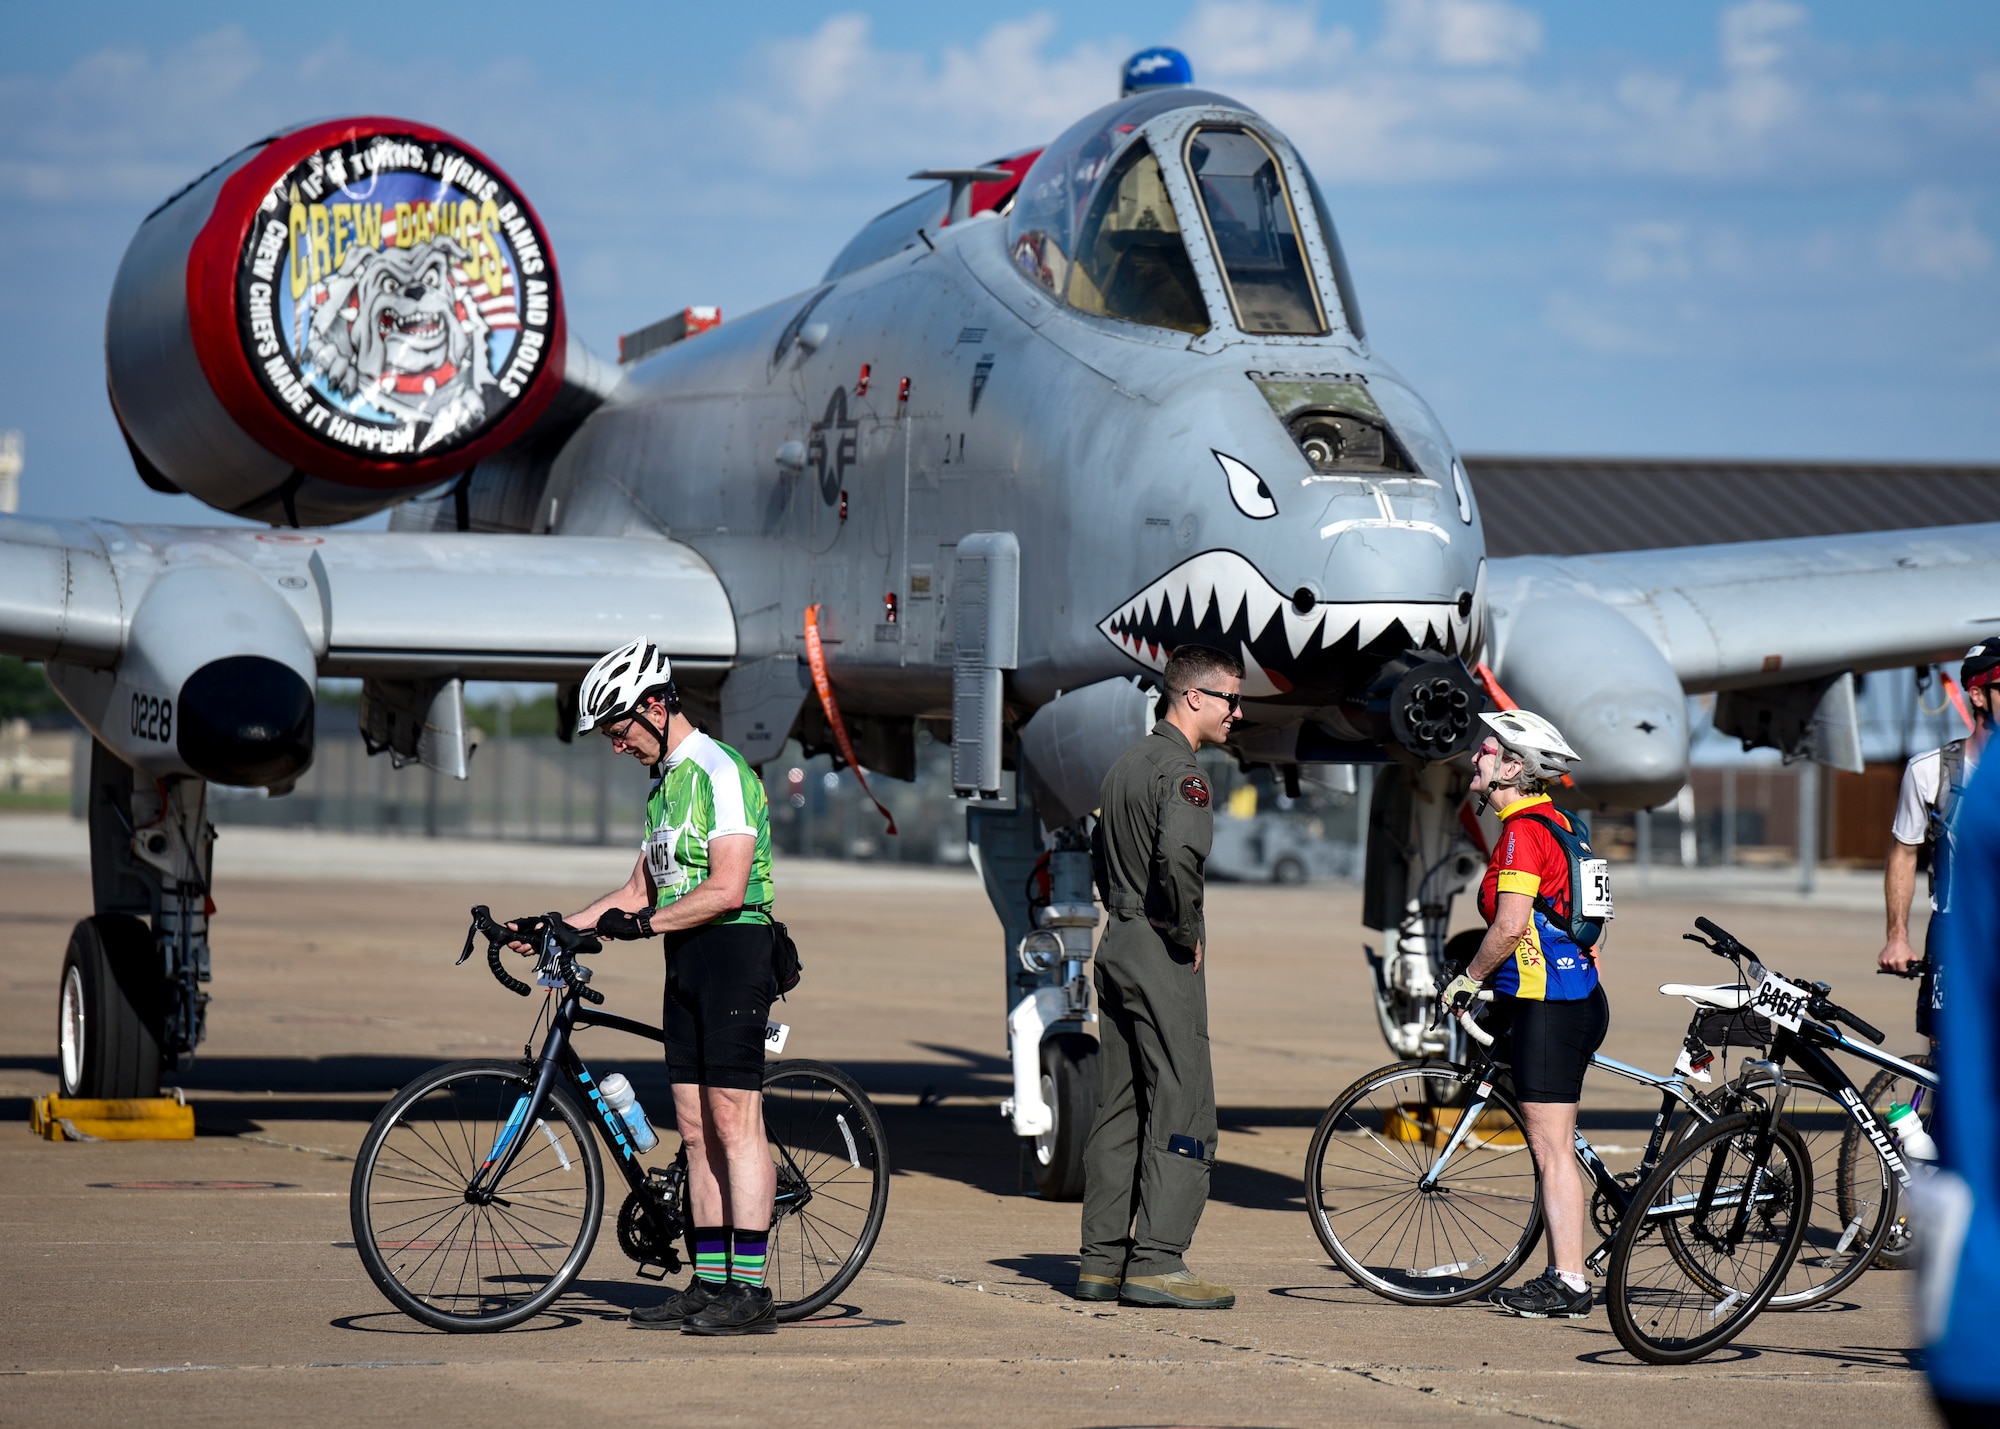 A pilot talks to an elderly biker about the A-10 Warthog right in front of them.